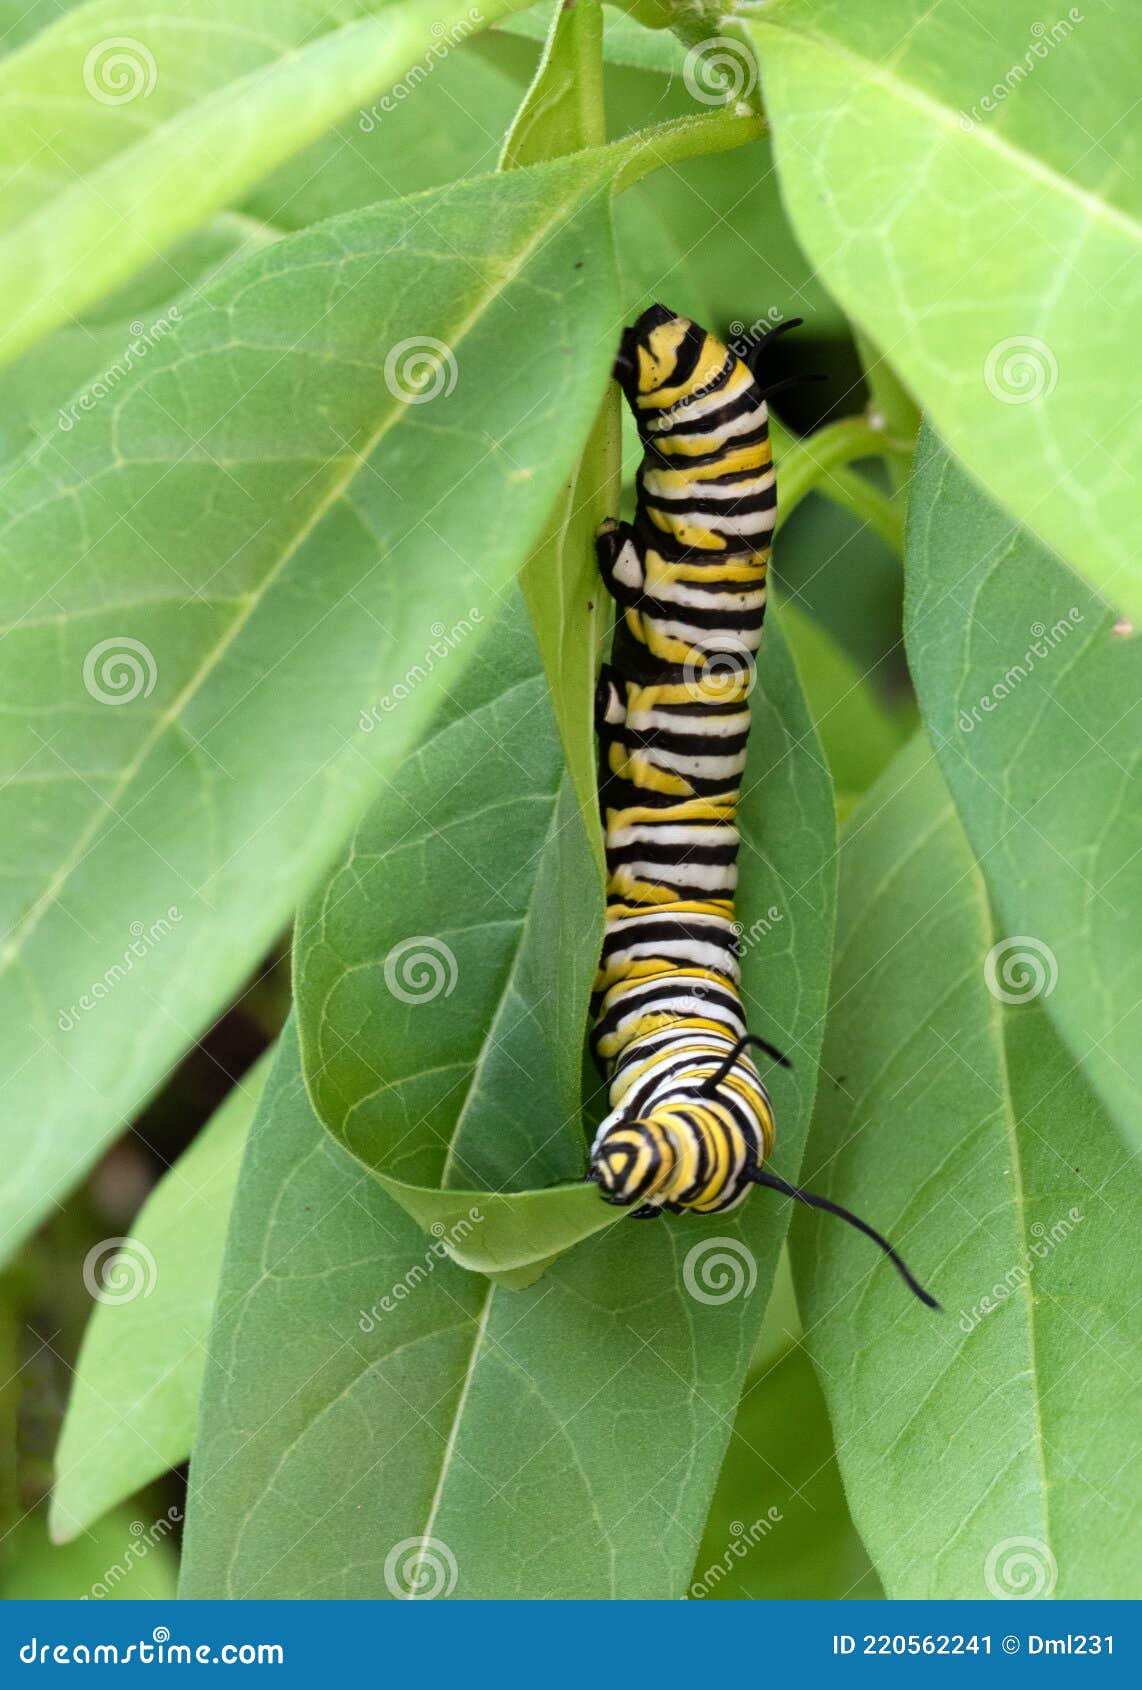 Striped Monarch Caterpillar Nibbles on Milkweed Leaf Stock Image ...